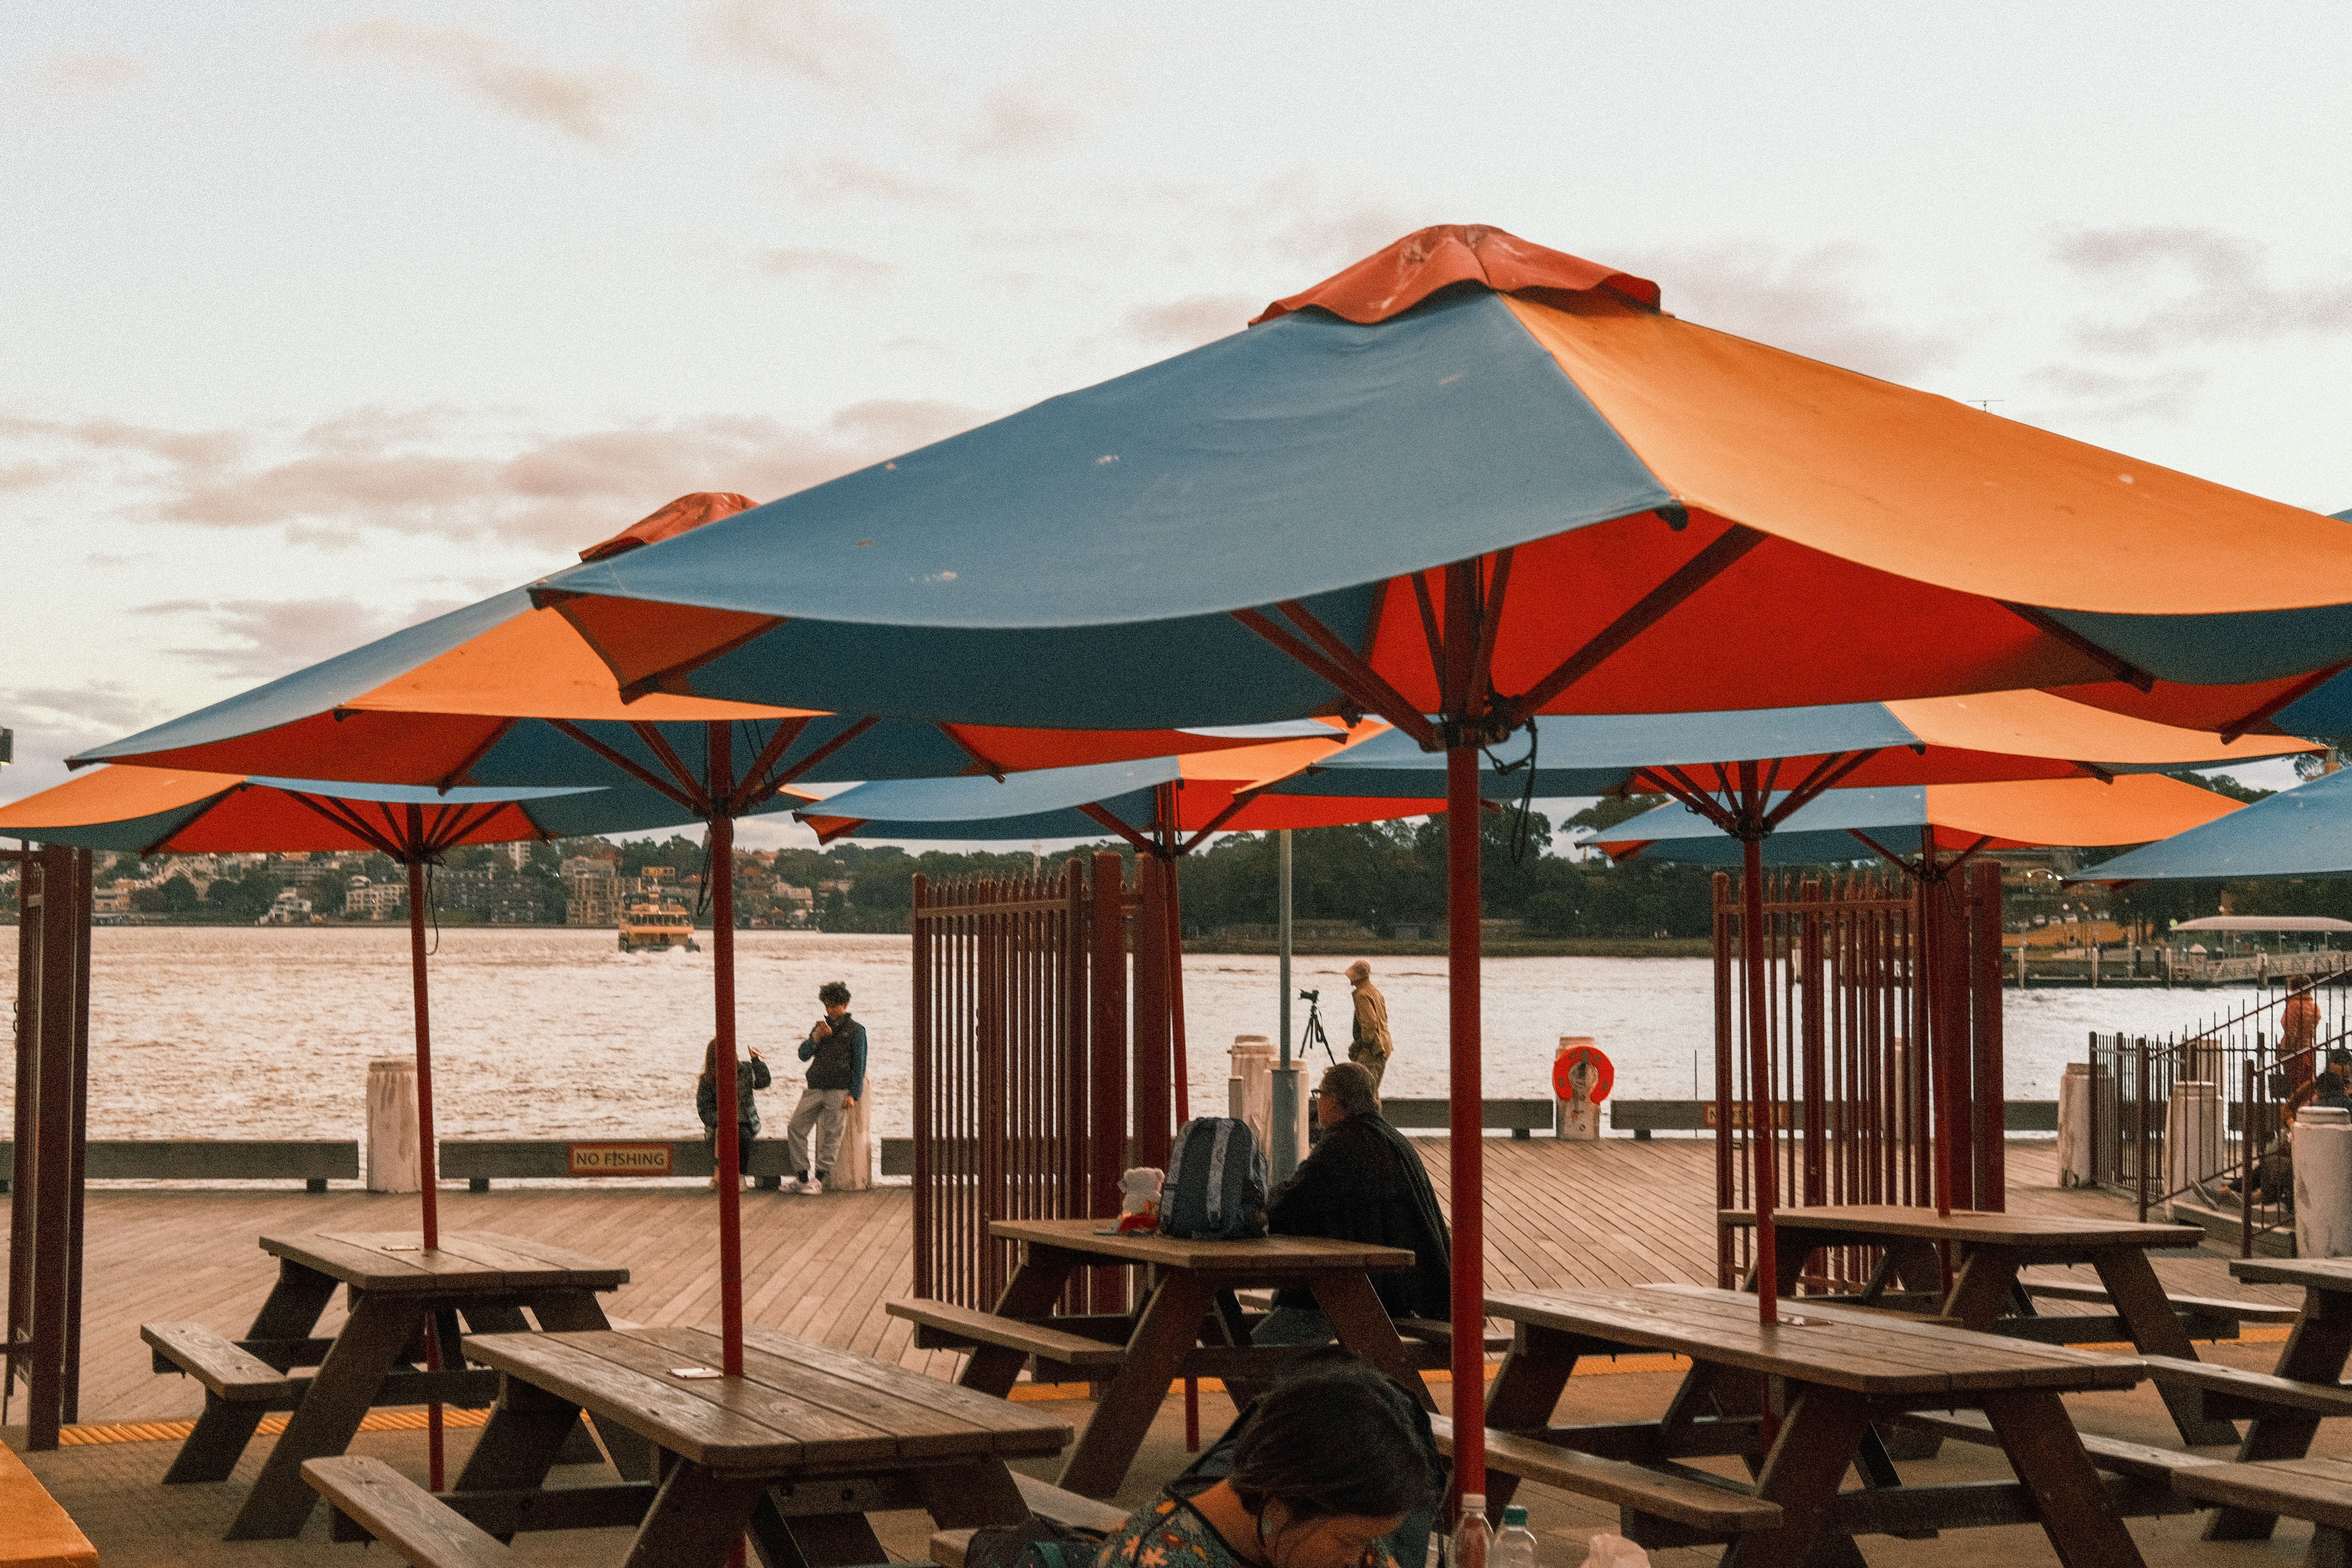 Umbrellas and outdoor seating at the waterfront